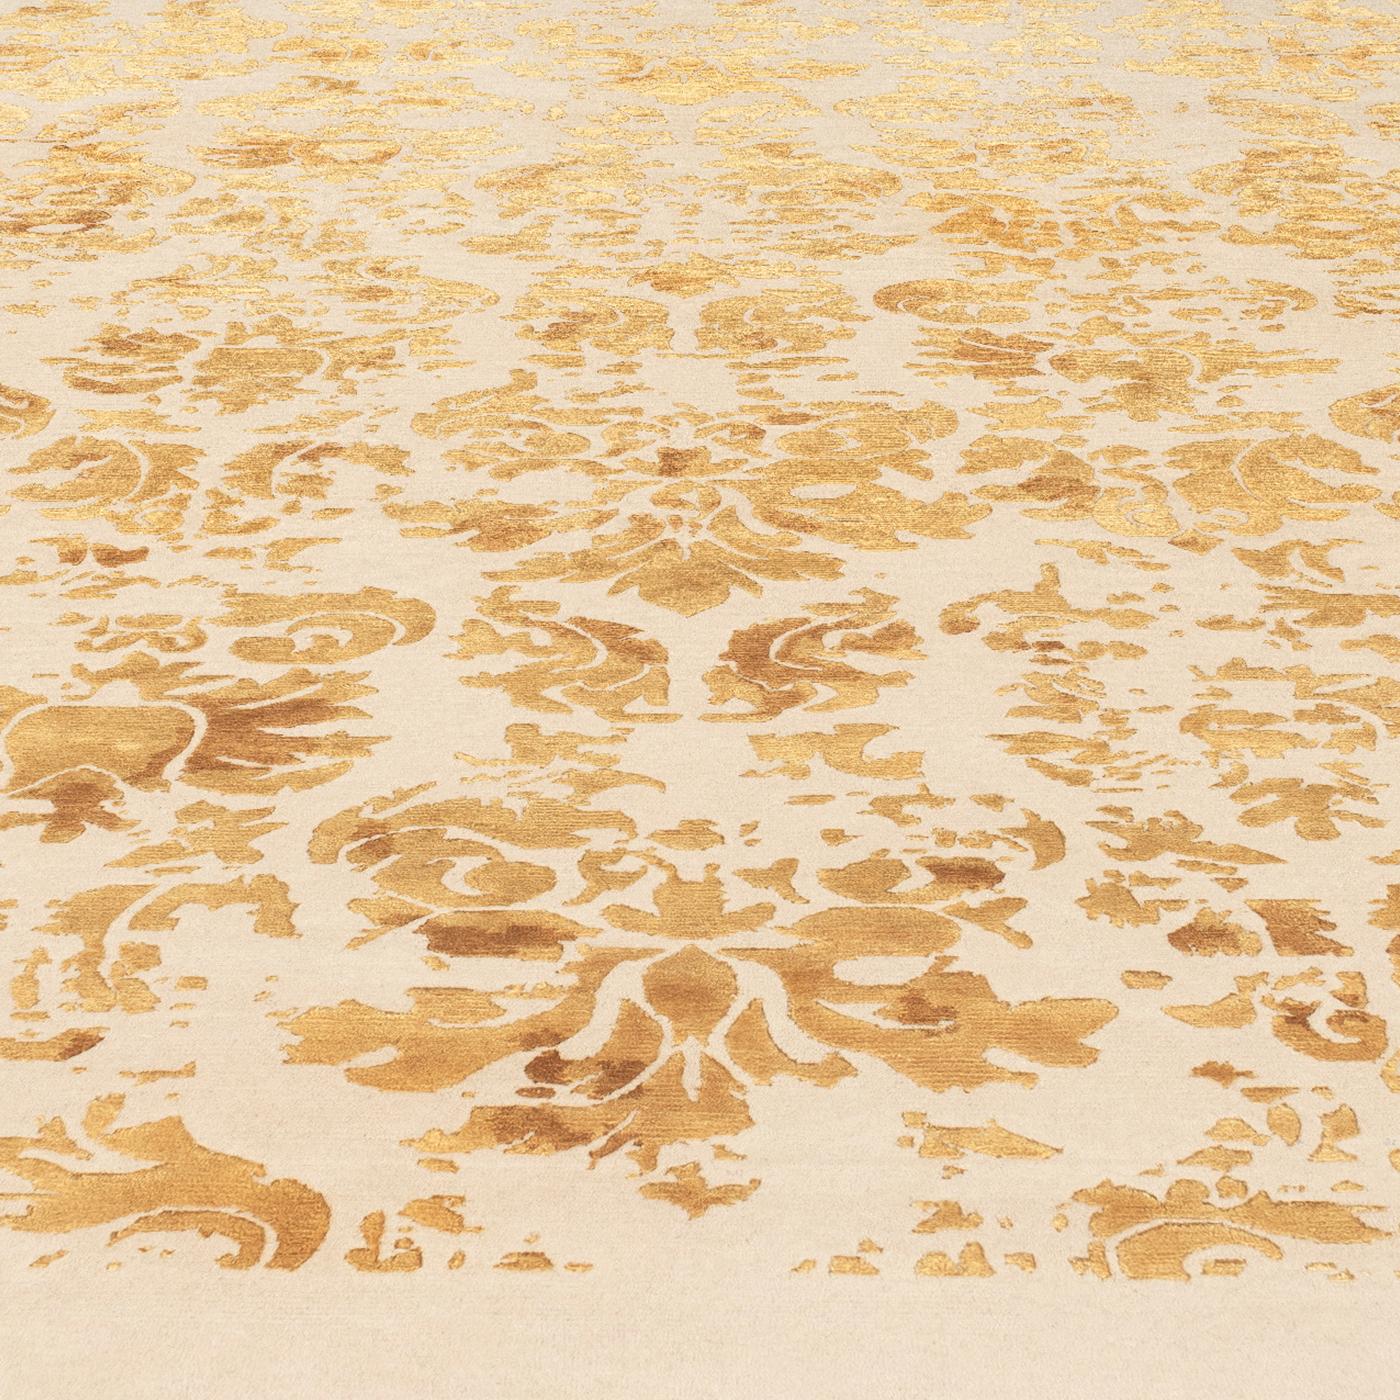 This luminous rug made of 50% Himalayan wool and 50% silk in warm and delicate neutral tones will bring the timeless charm of damask patterns to any interior. Hand-knotted with a density of 152,000 knot/sqm by Nepalese artisans, it features a base